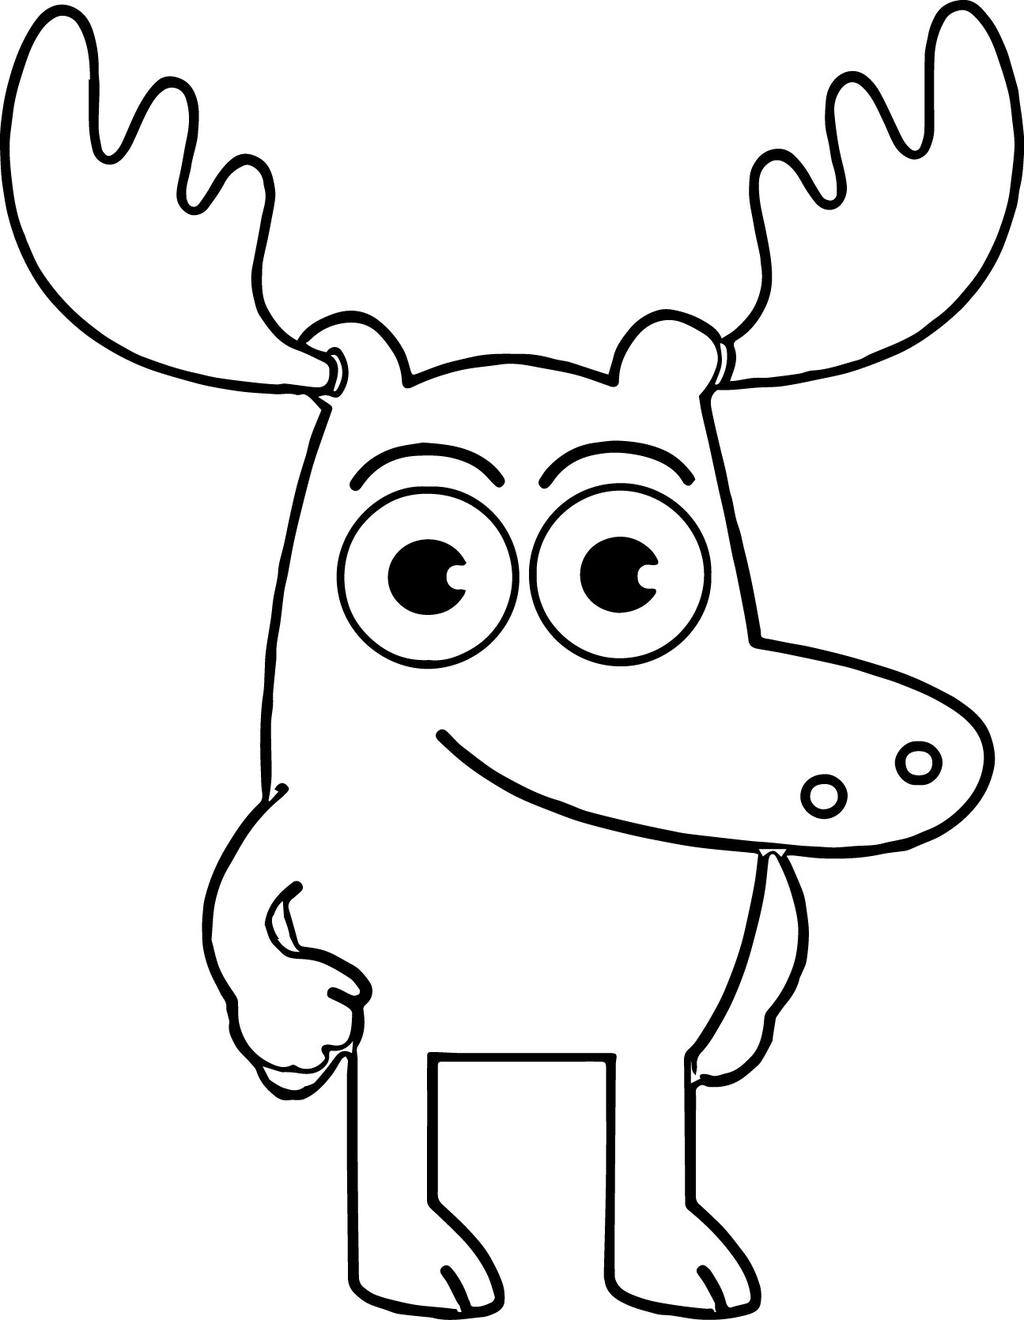 Free Moose Coloring Pages Animated for Adults printable